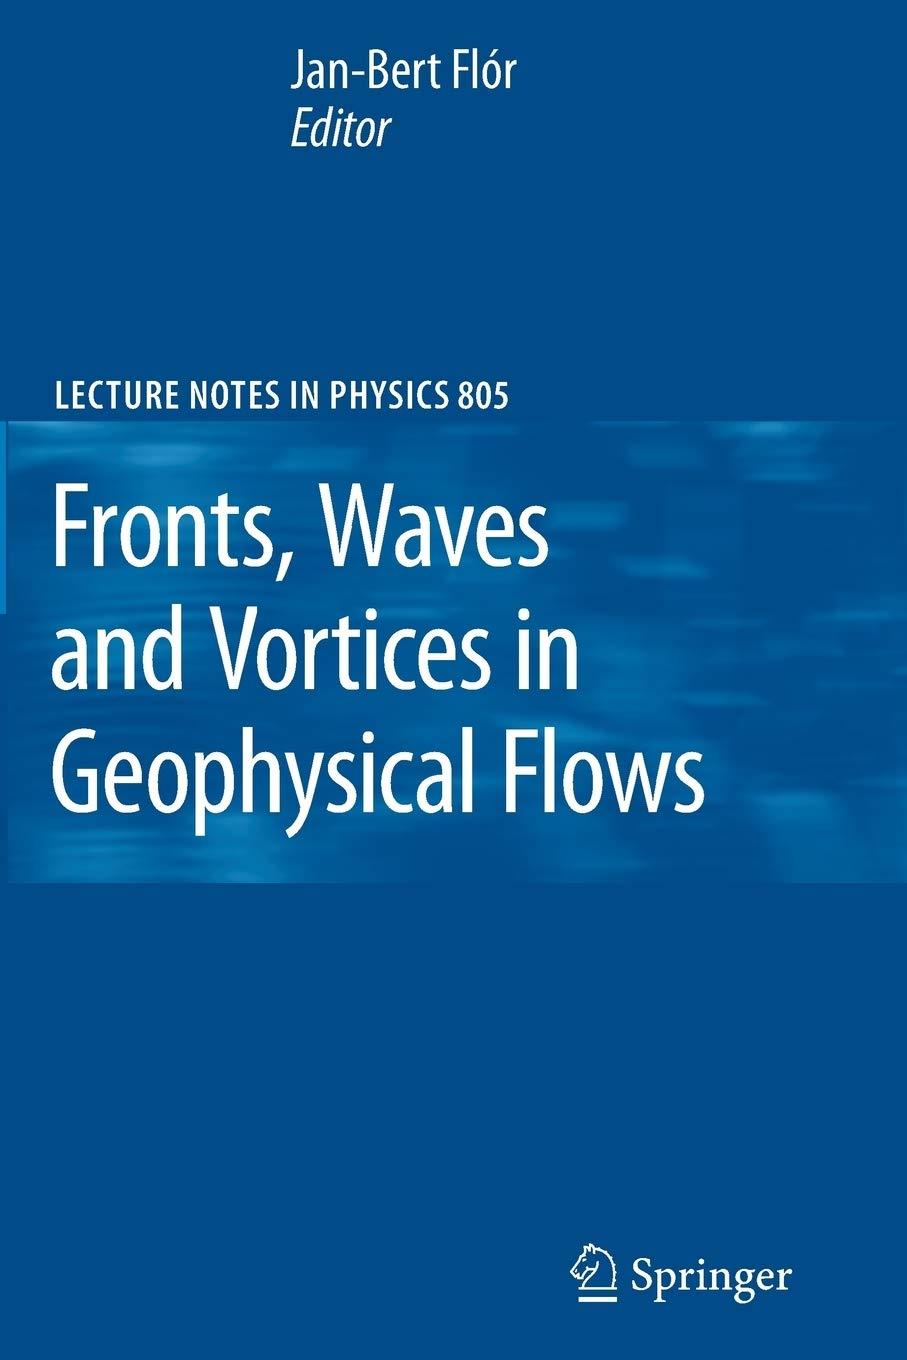 fronts waves and vortices in geophysical flows 1st 2010th edition jan-bert flor 3642115861, 978-3642115868